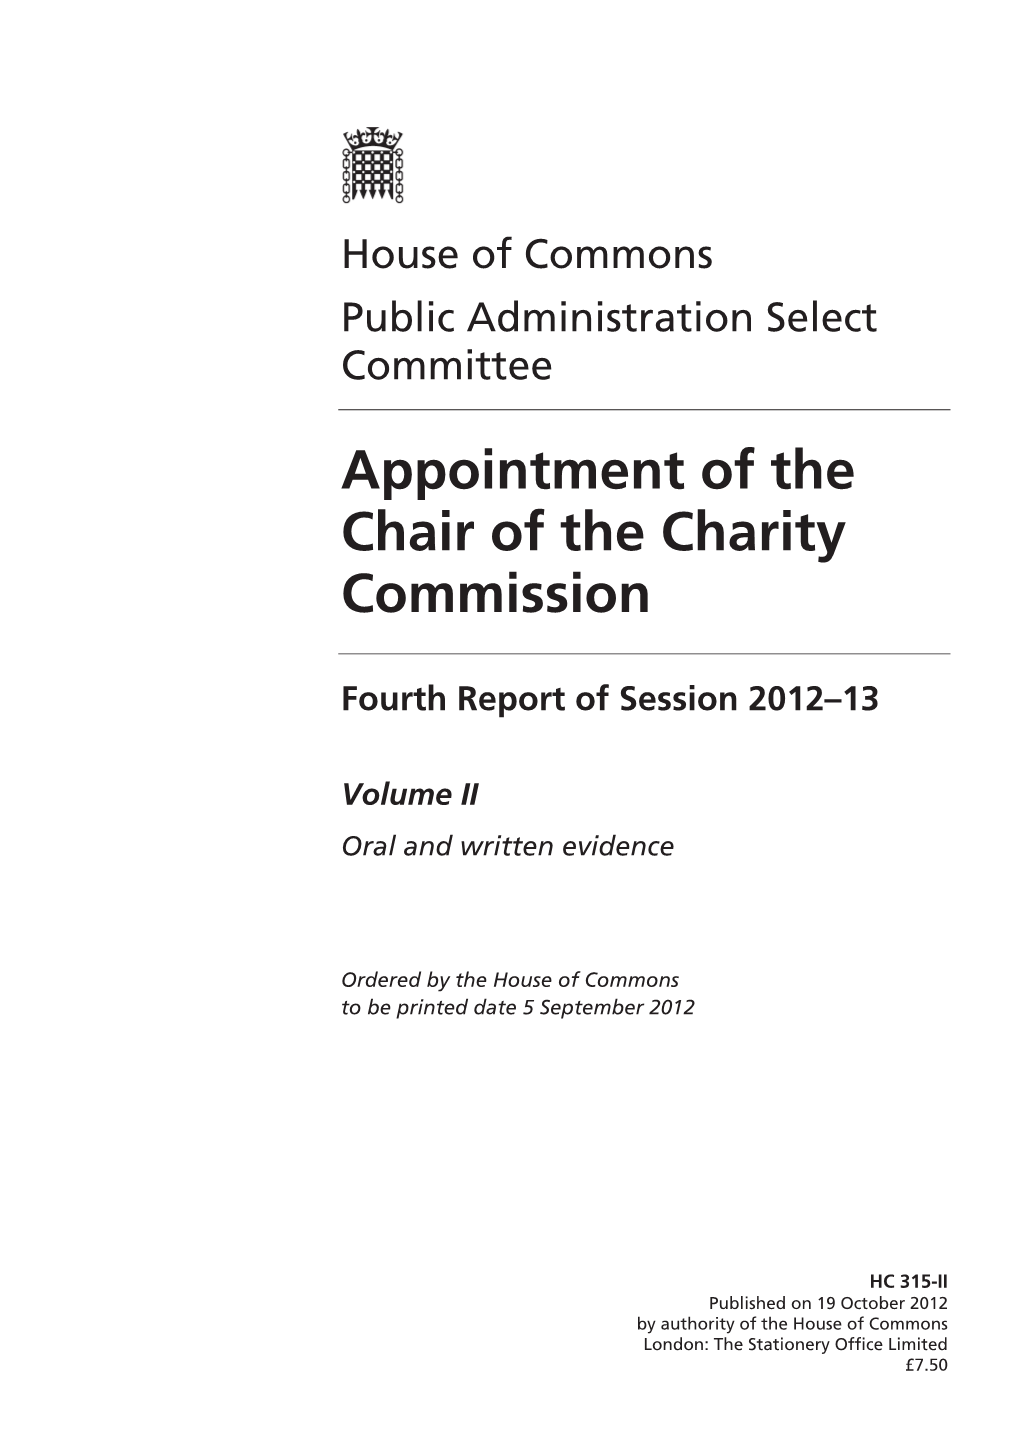 Appointment of the Chair of the Charity Commission